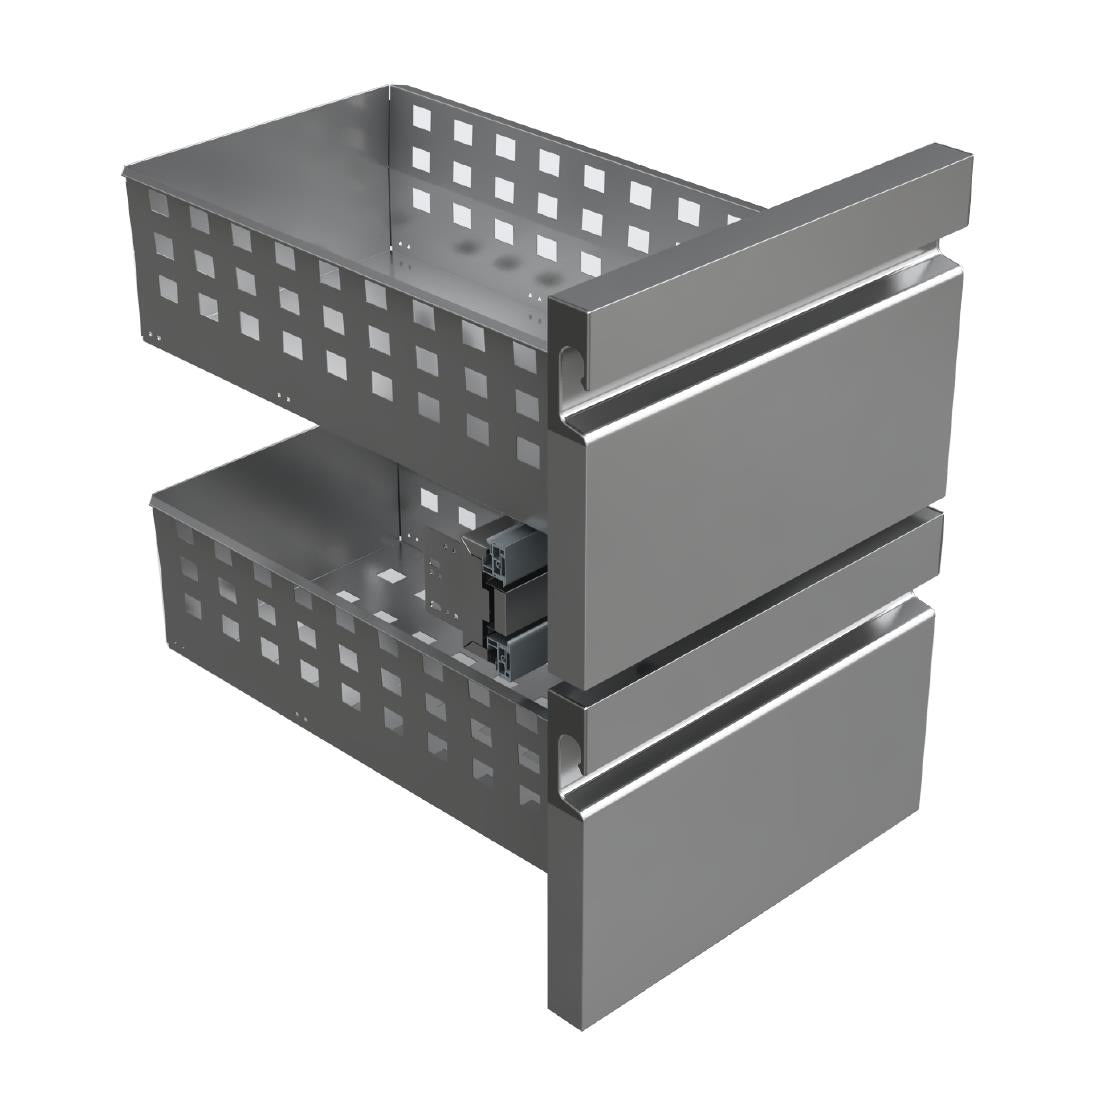 FU026 Fagor Concept Kit Drawers for Counter Units 1/2 & 1/2 JD Catering Equipment Solutions Ltd